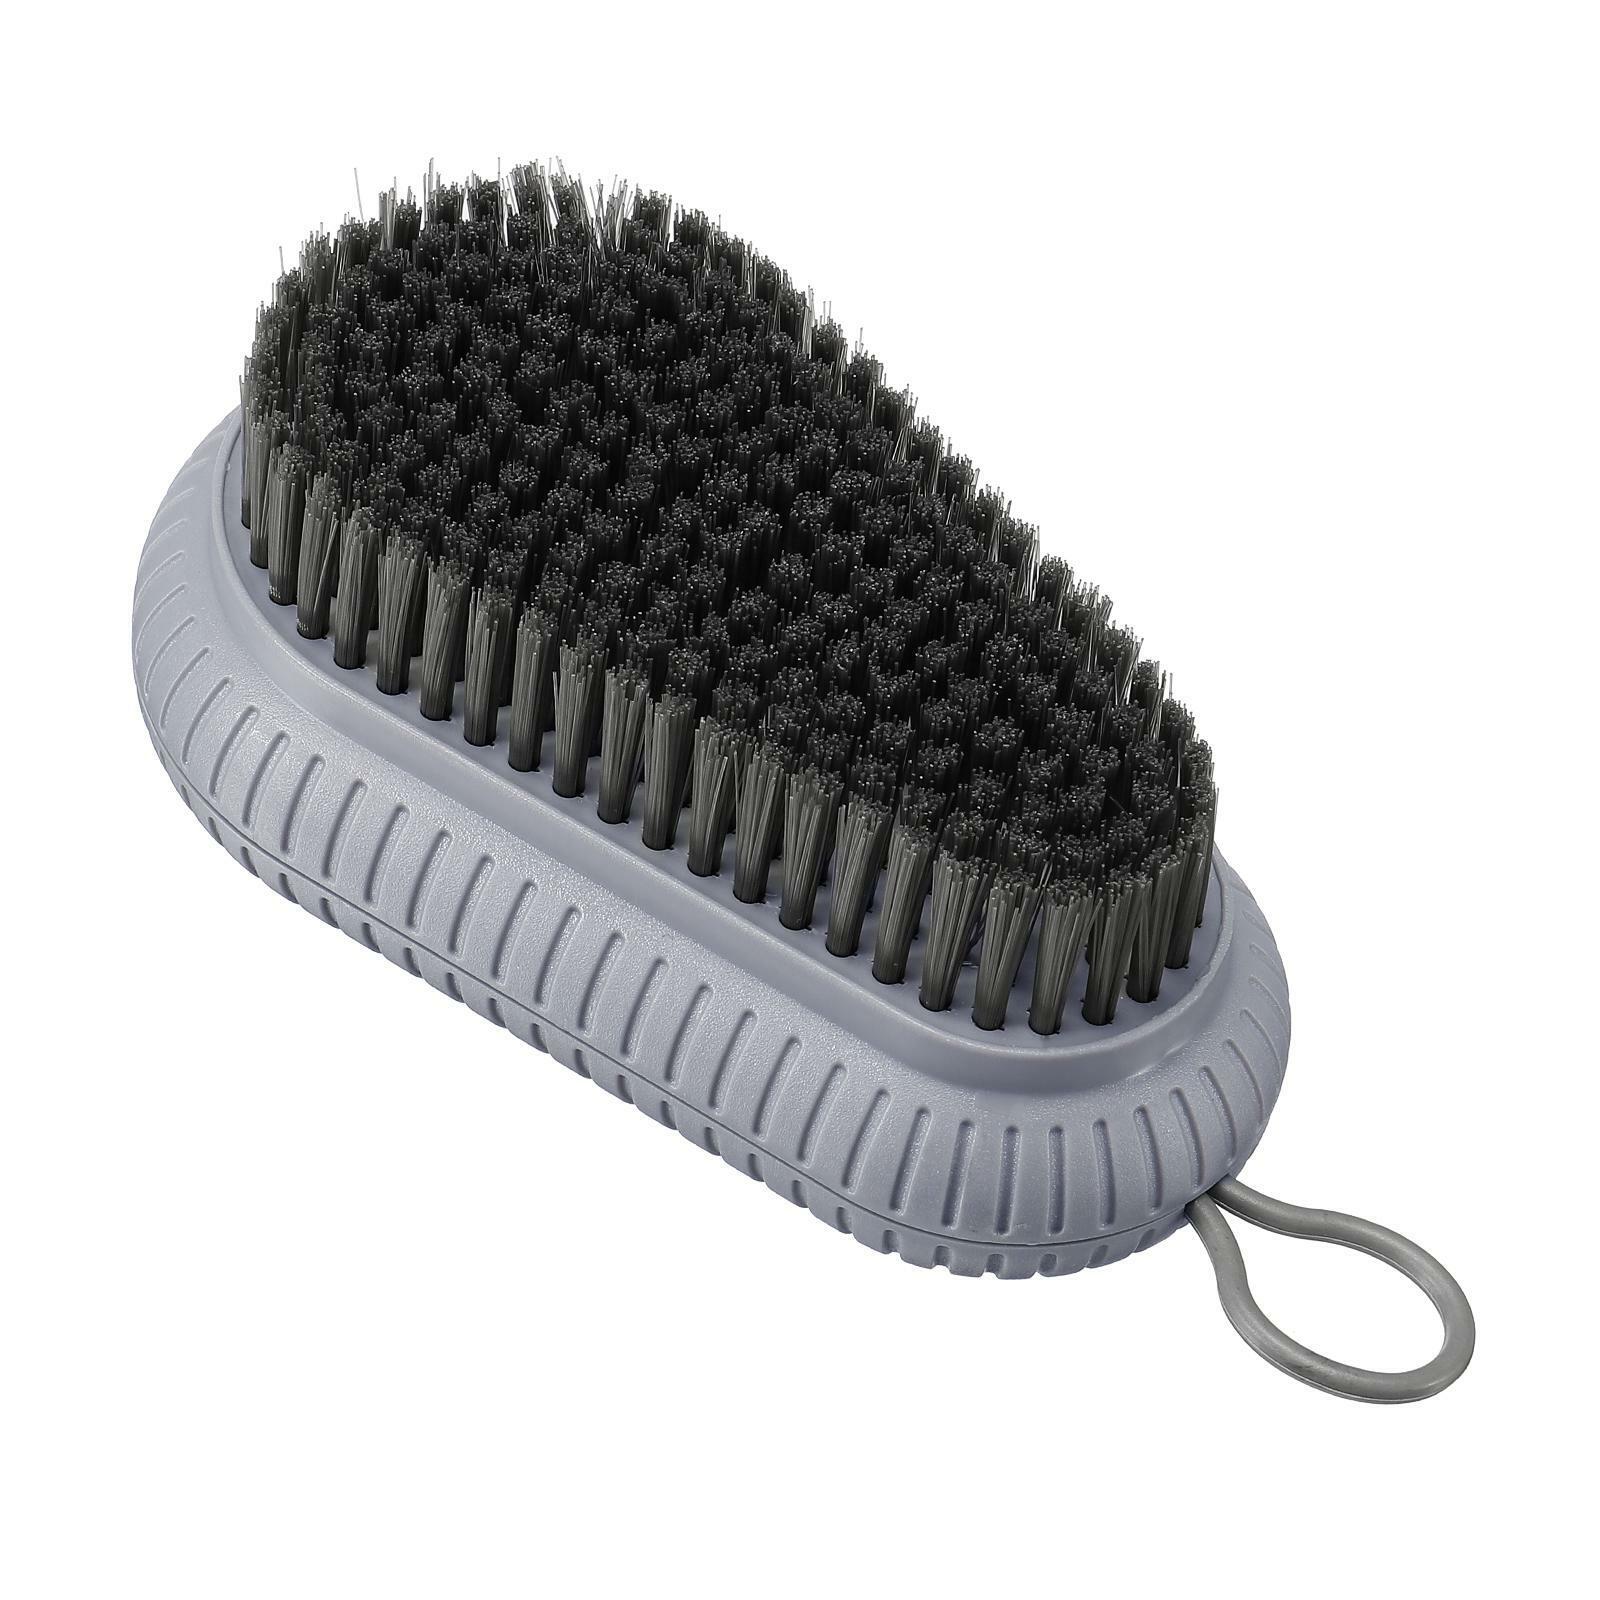 Cleaning Brush Pp Bristles Abs Back Hanging With Hole Shoes Scrubber, Gray